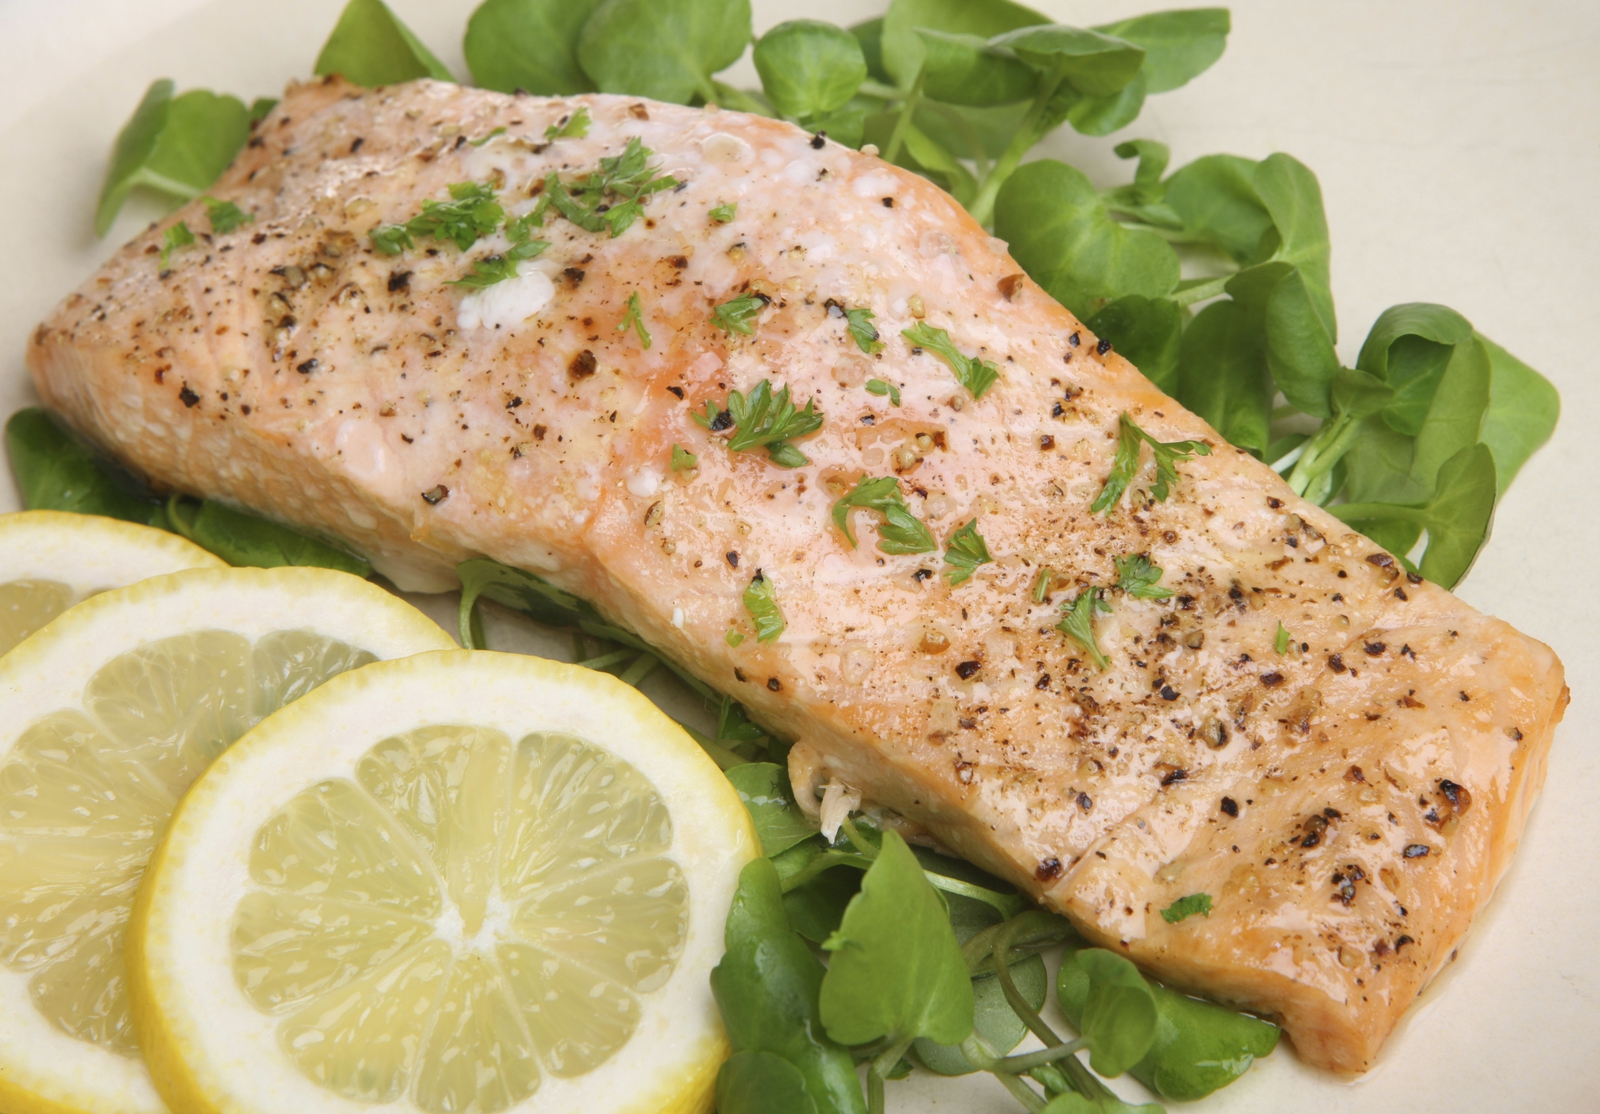 Martin's Oven Baked Salmon with Dill Glaze: Today